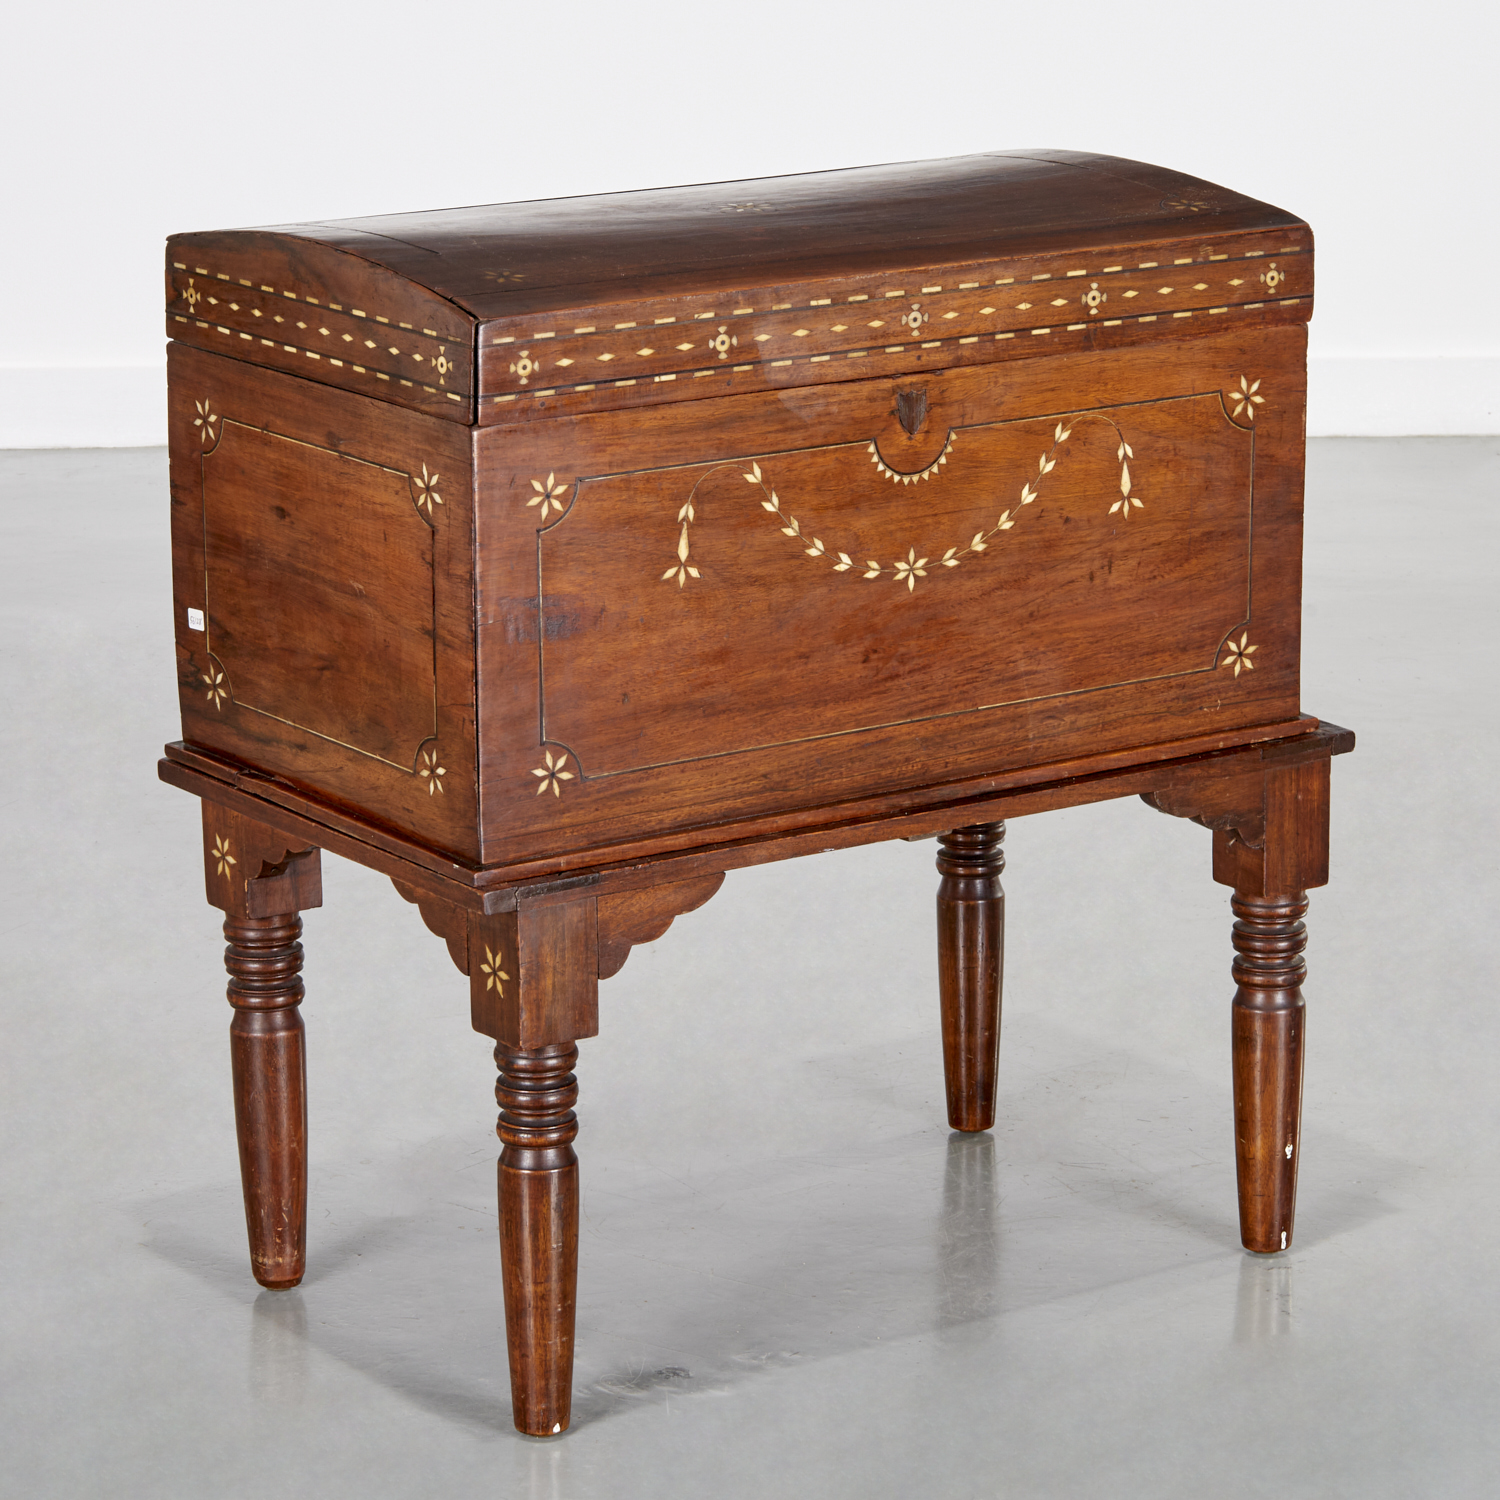 DUTCH COLONIAL INLAID CHEST ON